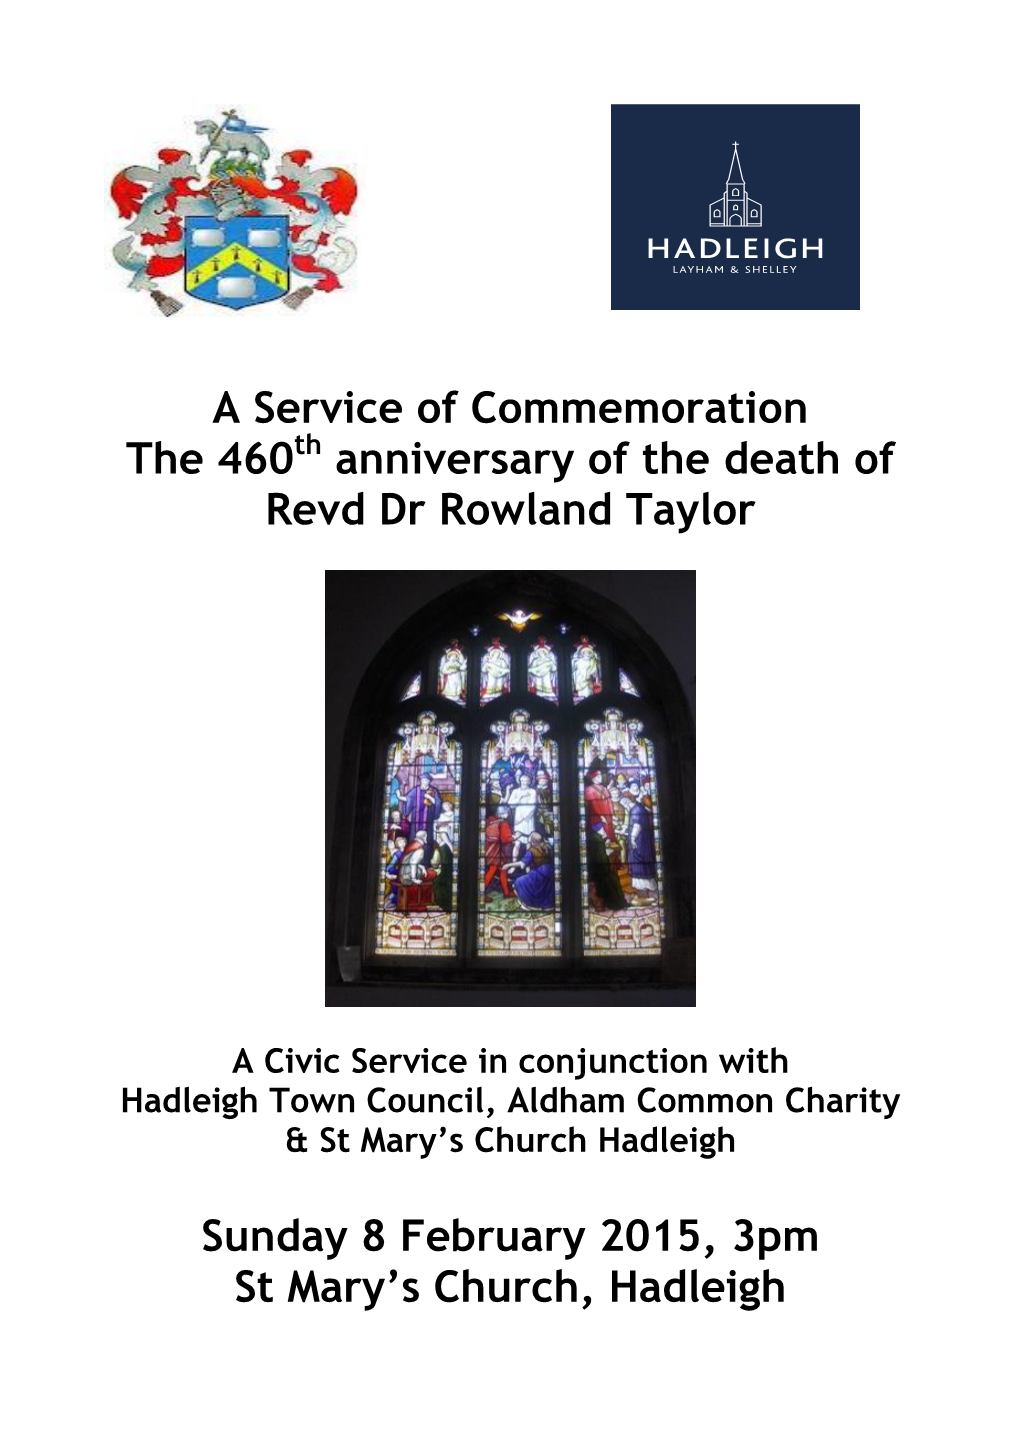 A Service of Commemoration the 460Th Anniversary of the Death of Revd Dr Rowland Taylor